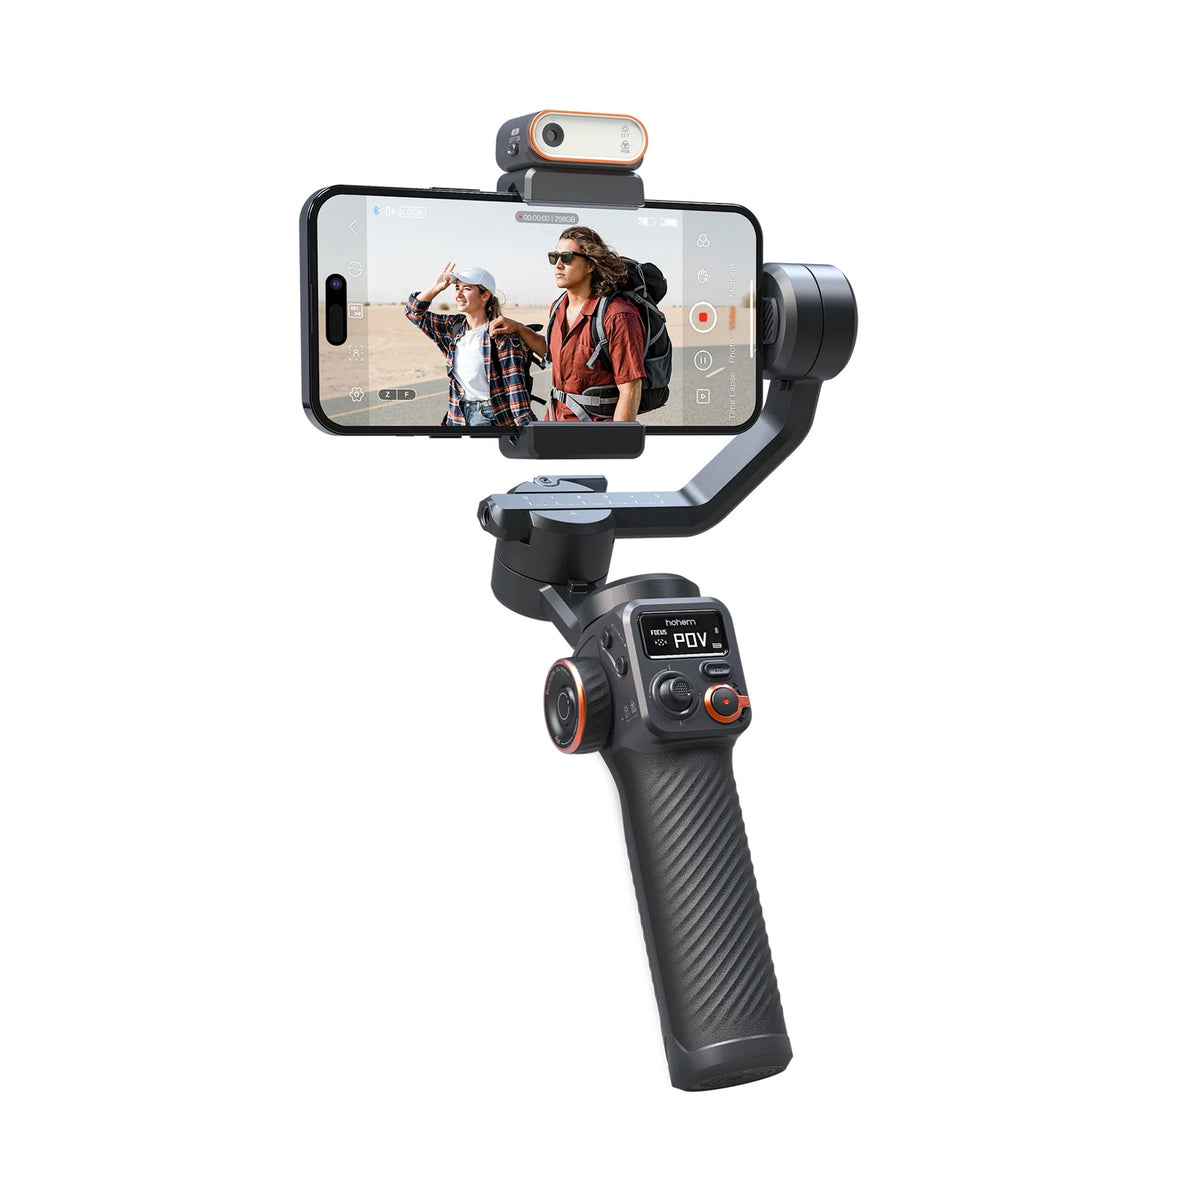 Hohem iSteady M6 Pro 3-Axis Smartphone Gimbal Stabilizer